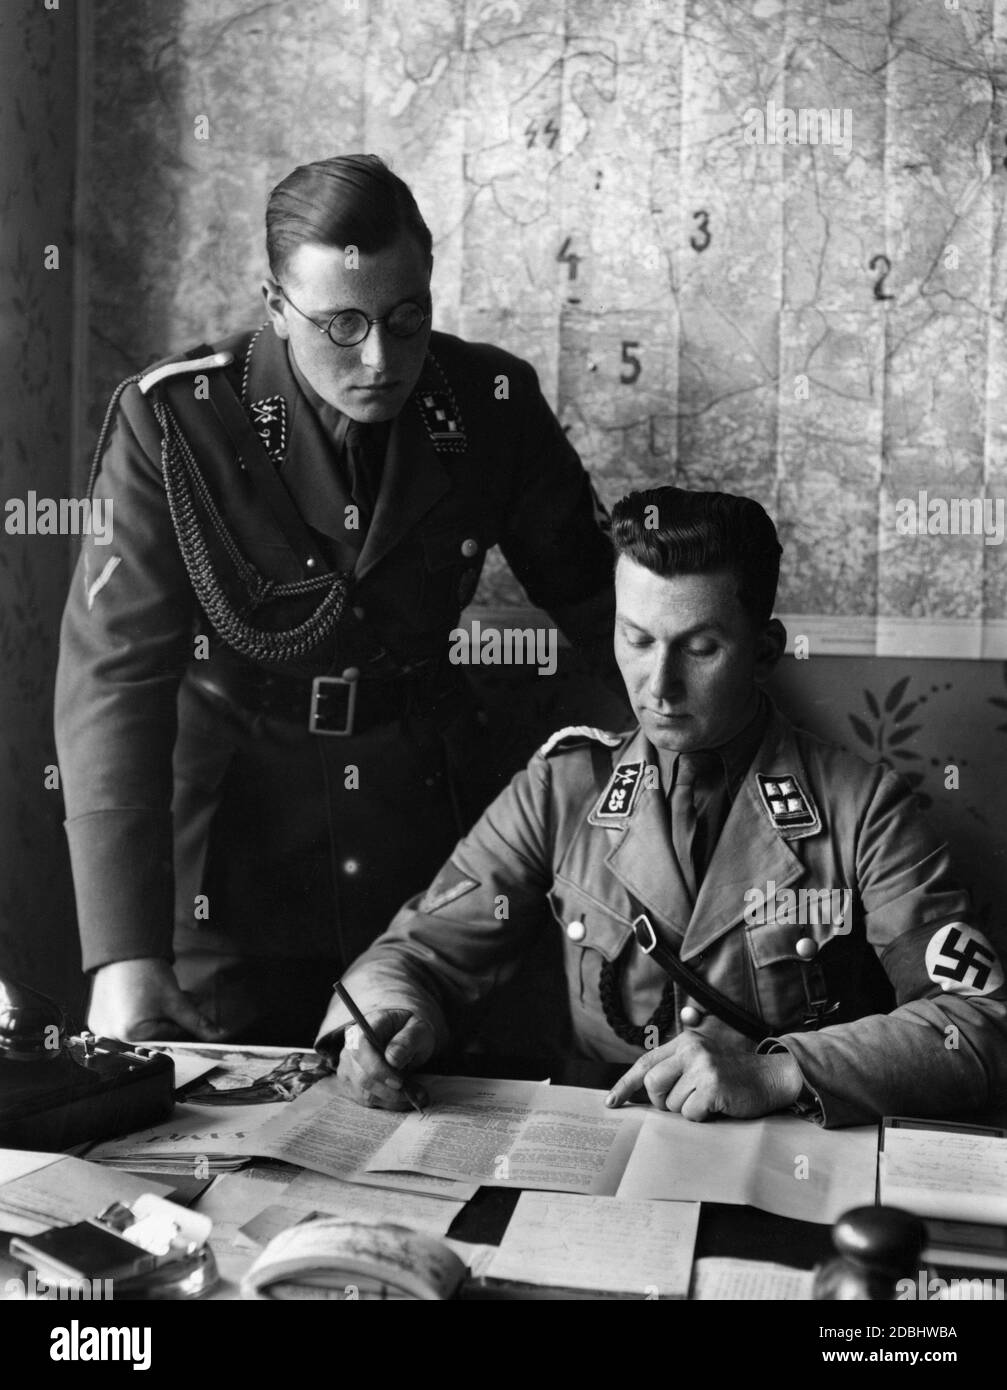 Obersturmbannfuehrer ( lieutenant colonel) v.d. Becke (r) working at his desk in Berlin. He is the leader of the SA Reiterstandarte 25. To his left is an SA Obersturmfuehrer (first lieutenant). Stock Photo